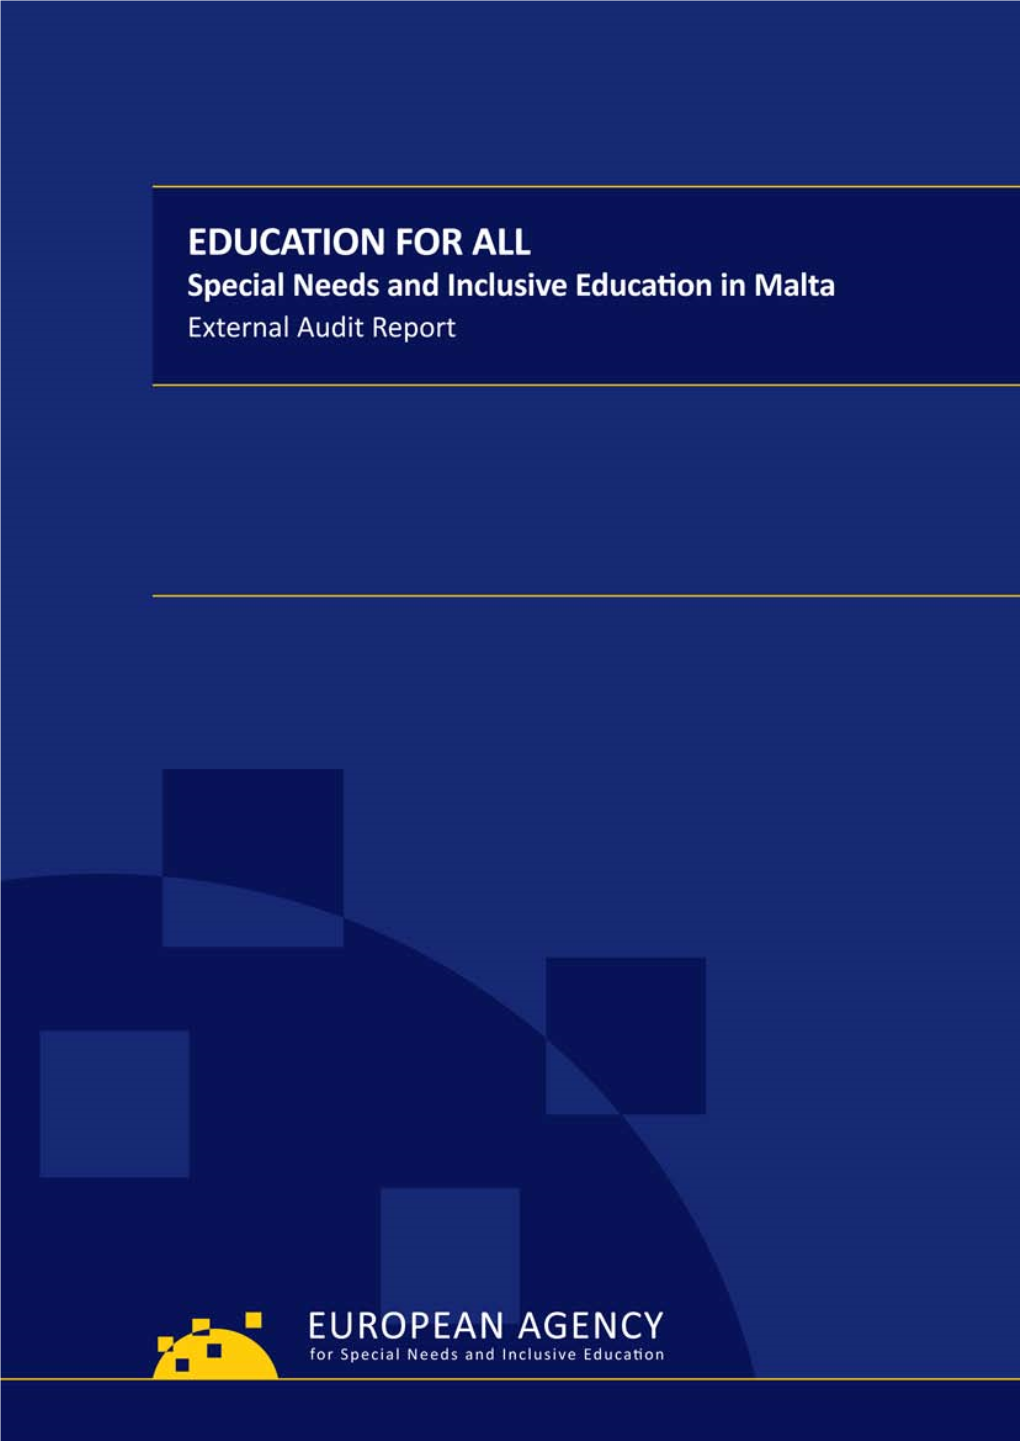 Special Needs and Inclusive Education in Malta